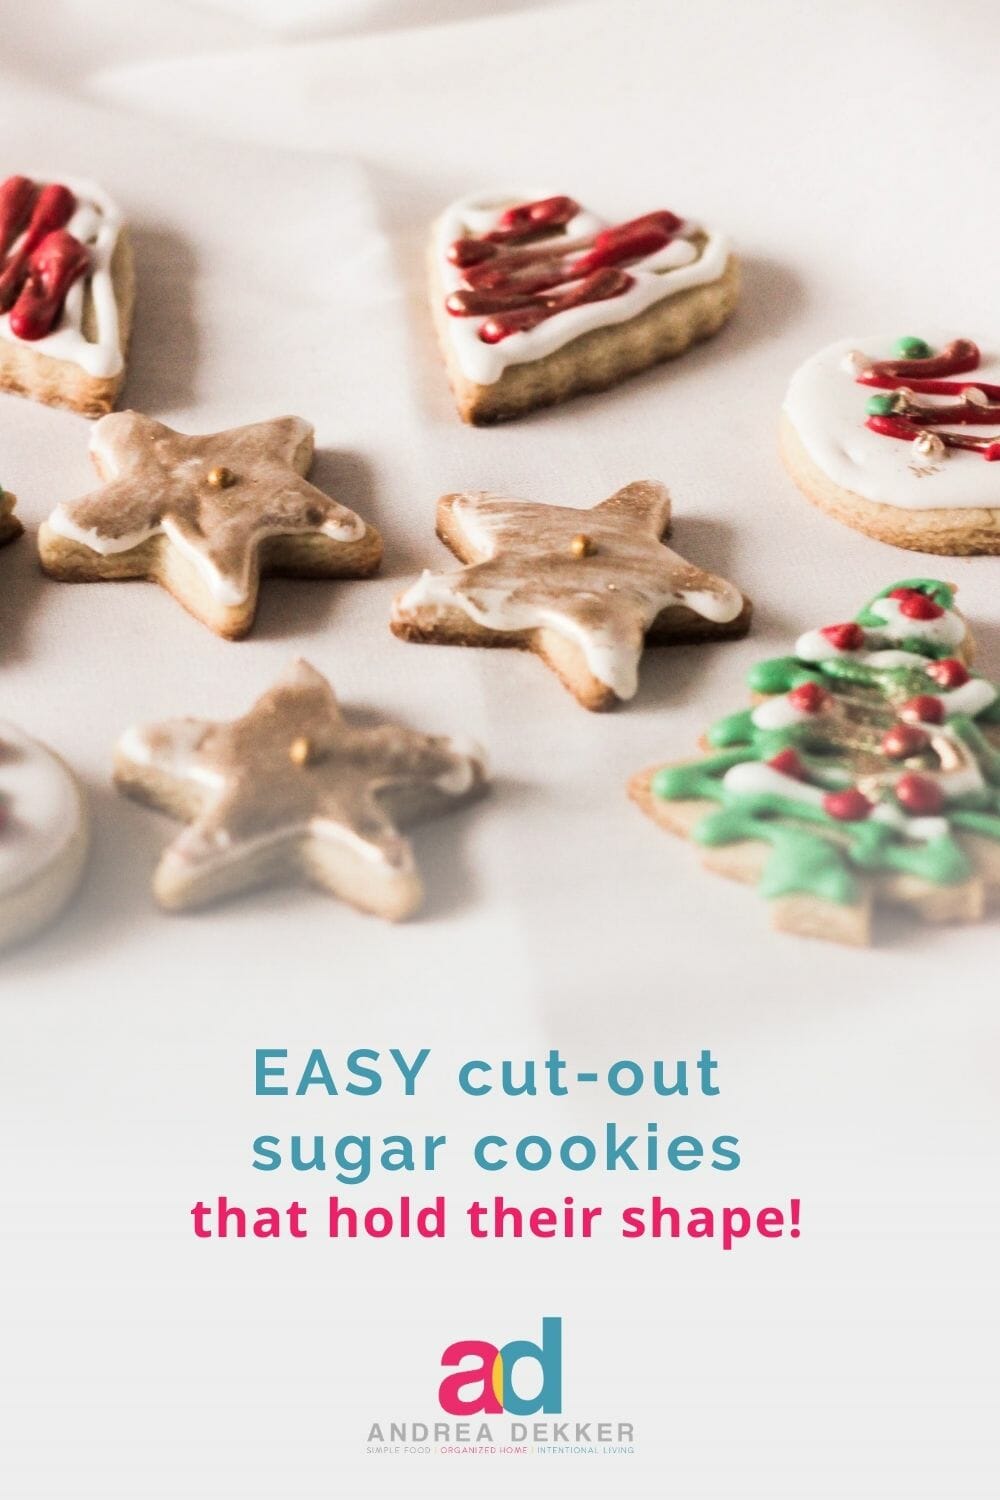 Create fun memories and yummy treats all year round with this easy cut-out sugar cookie recipe. You’ll totally be the “fun mom” (or grandma)! via @andreadekker